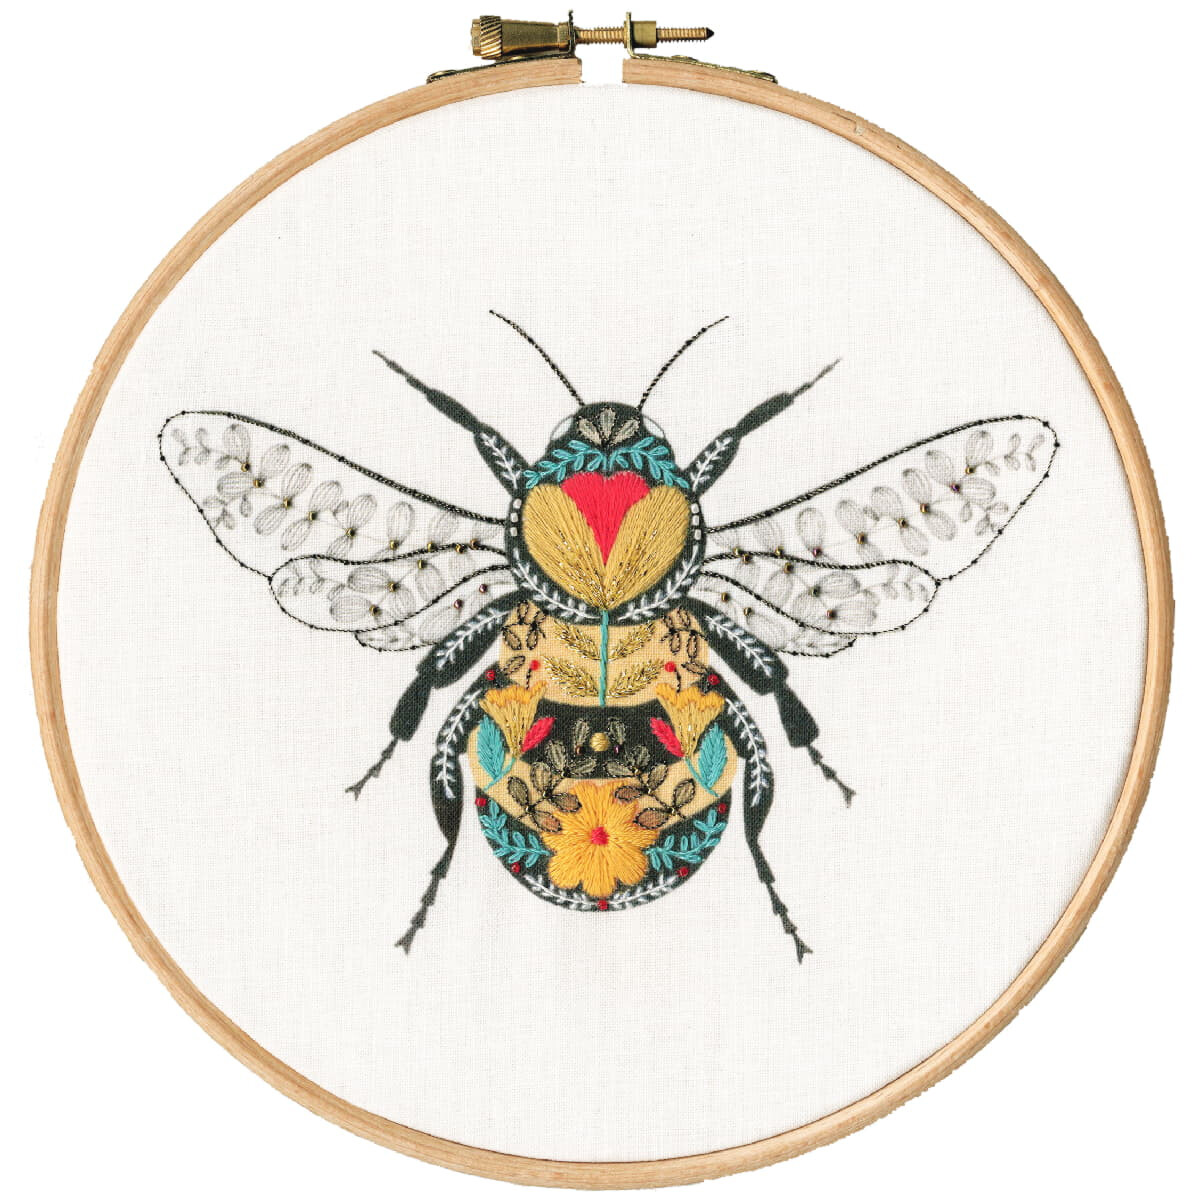 A detailed embroidery pack bee artwork from Bothy Threads...